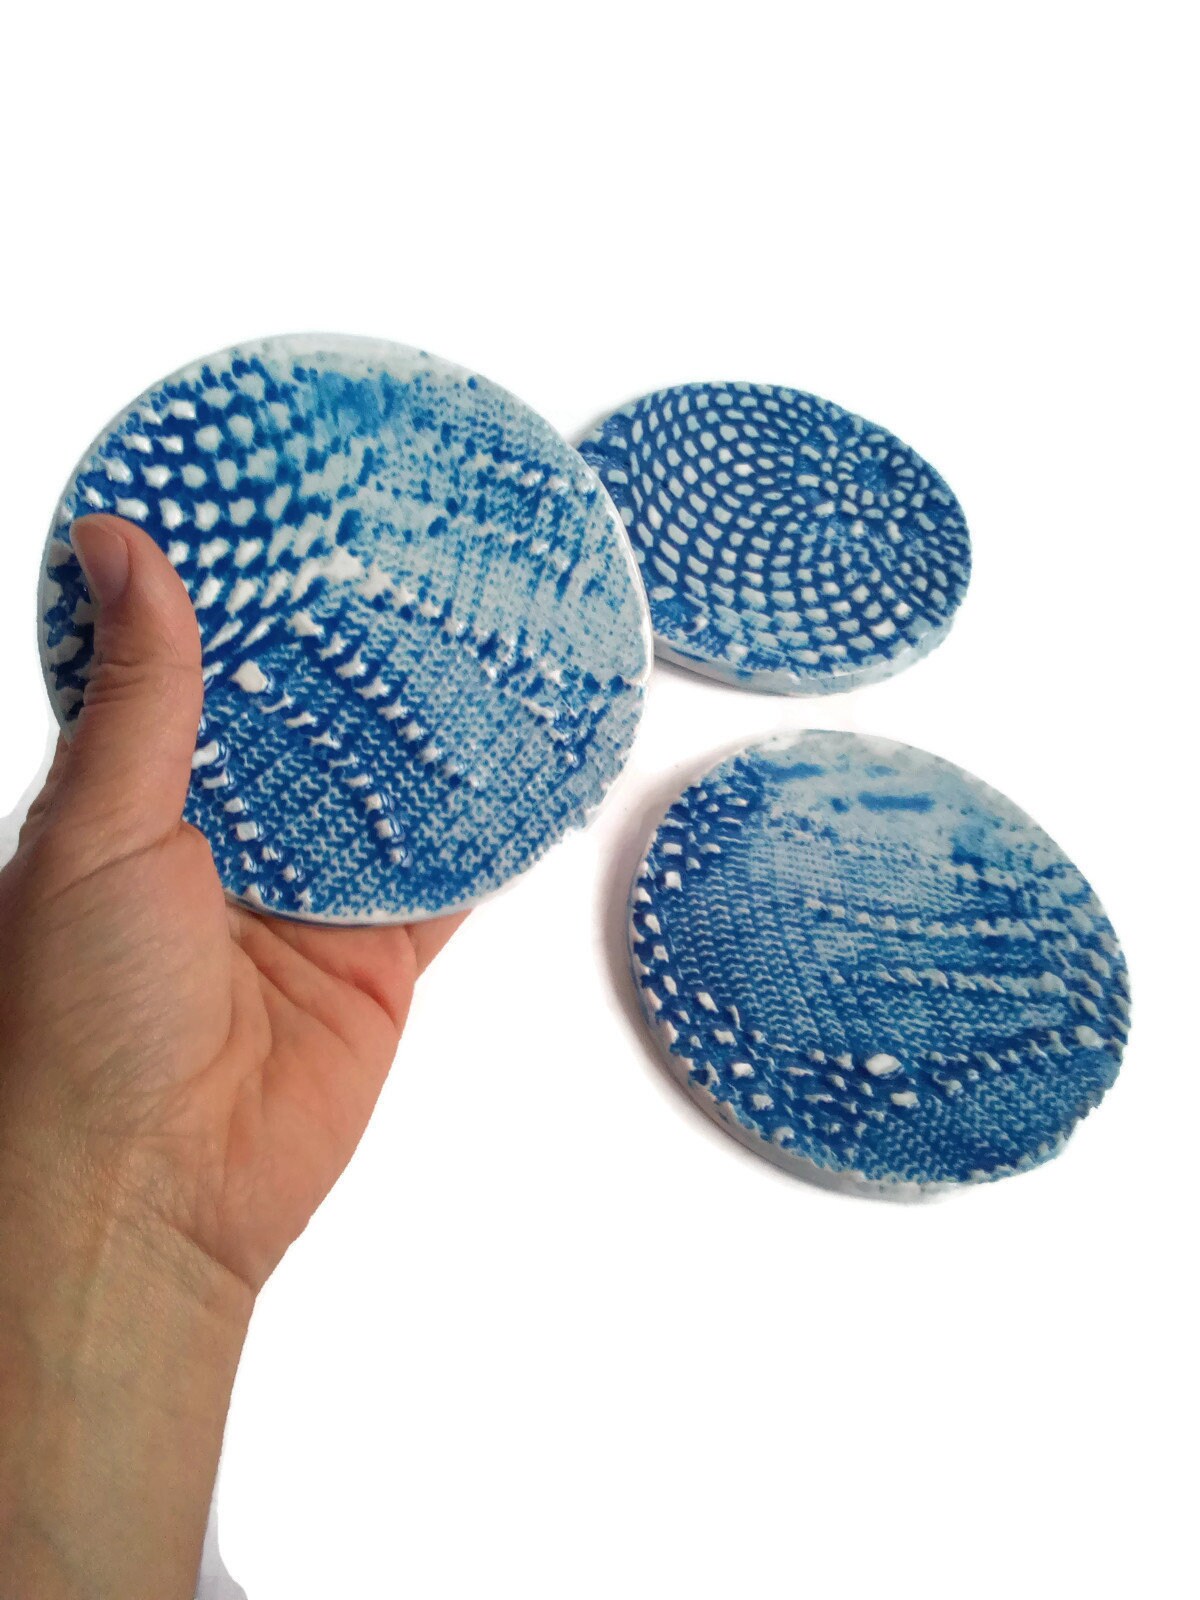 3Pc 11cm/4,3in Blue Handmade Ceramic Coasters With Lace Texture And Cork Back, Assorted Round Shape Trivet, Office Desk Accessories For Him - Ceramica Ana Rafael